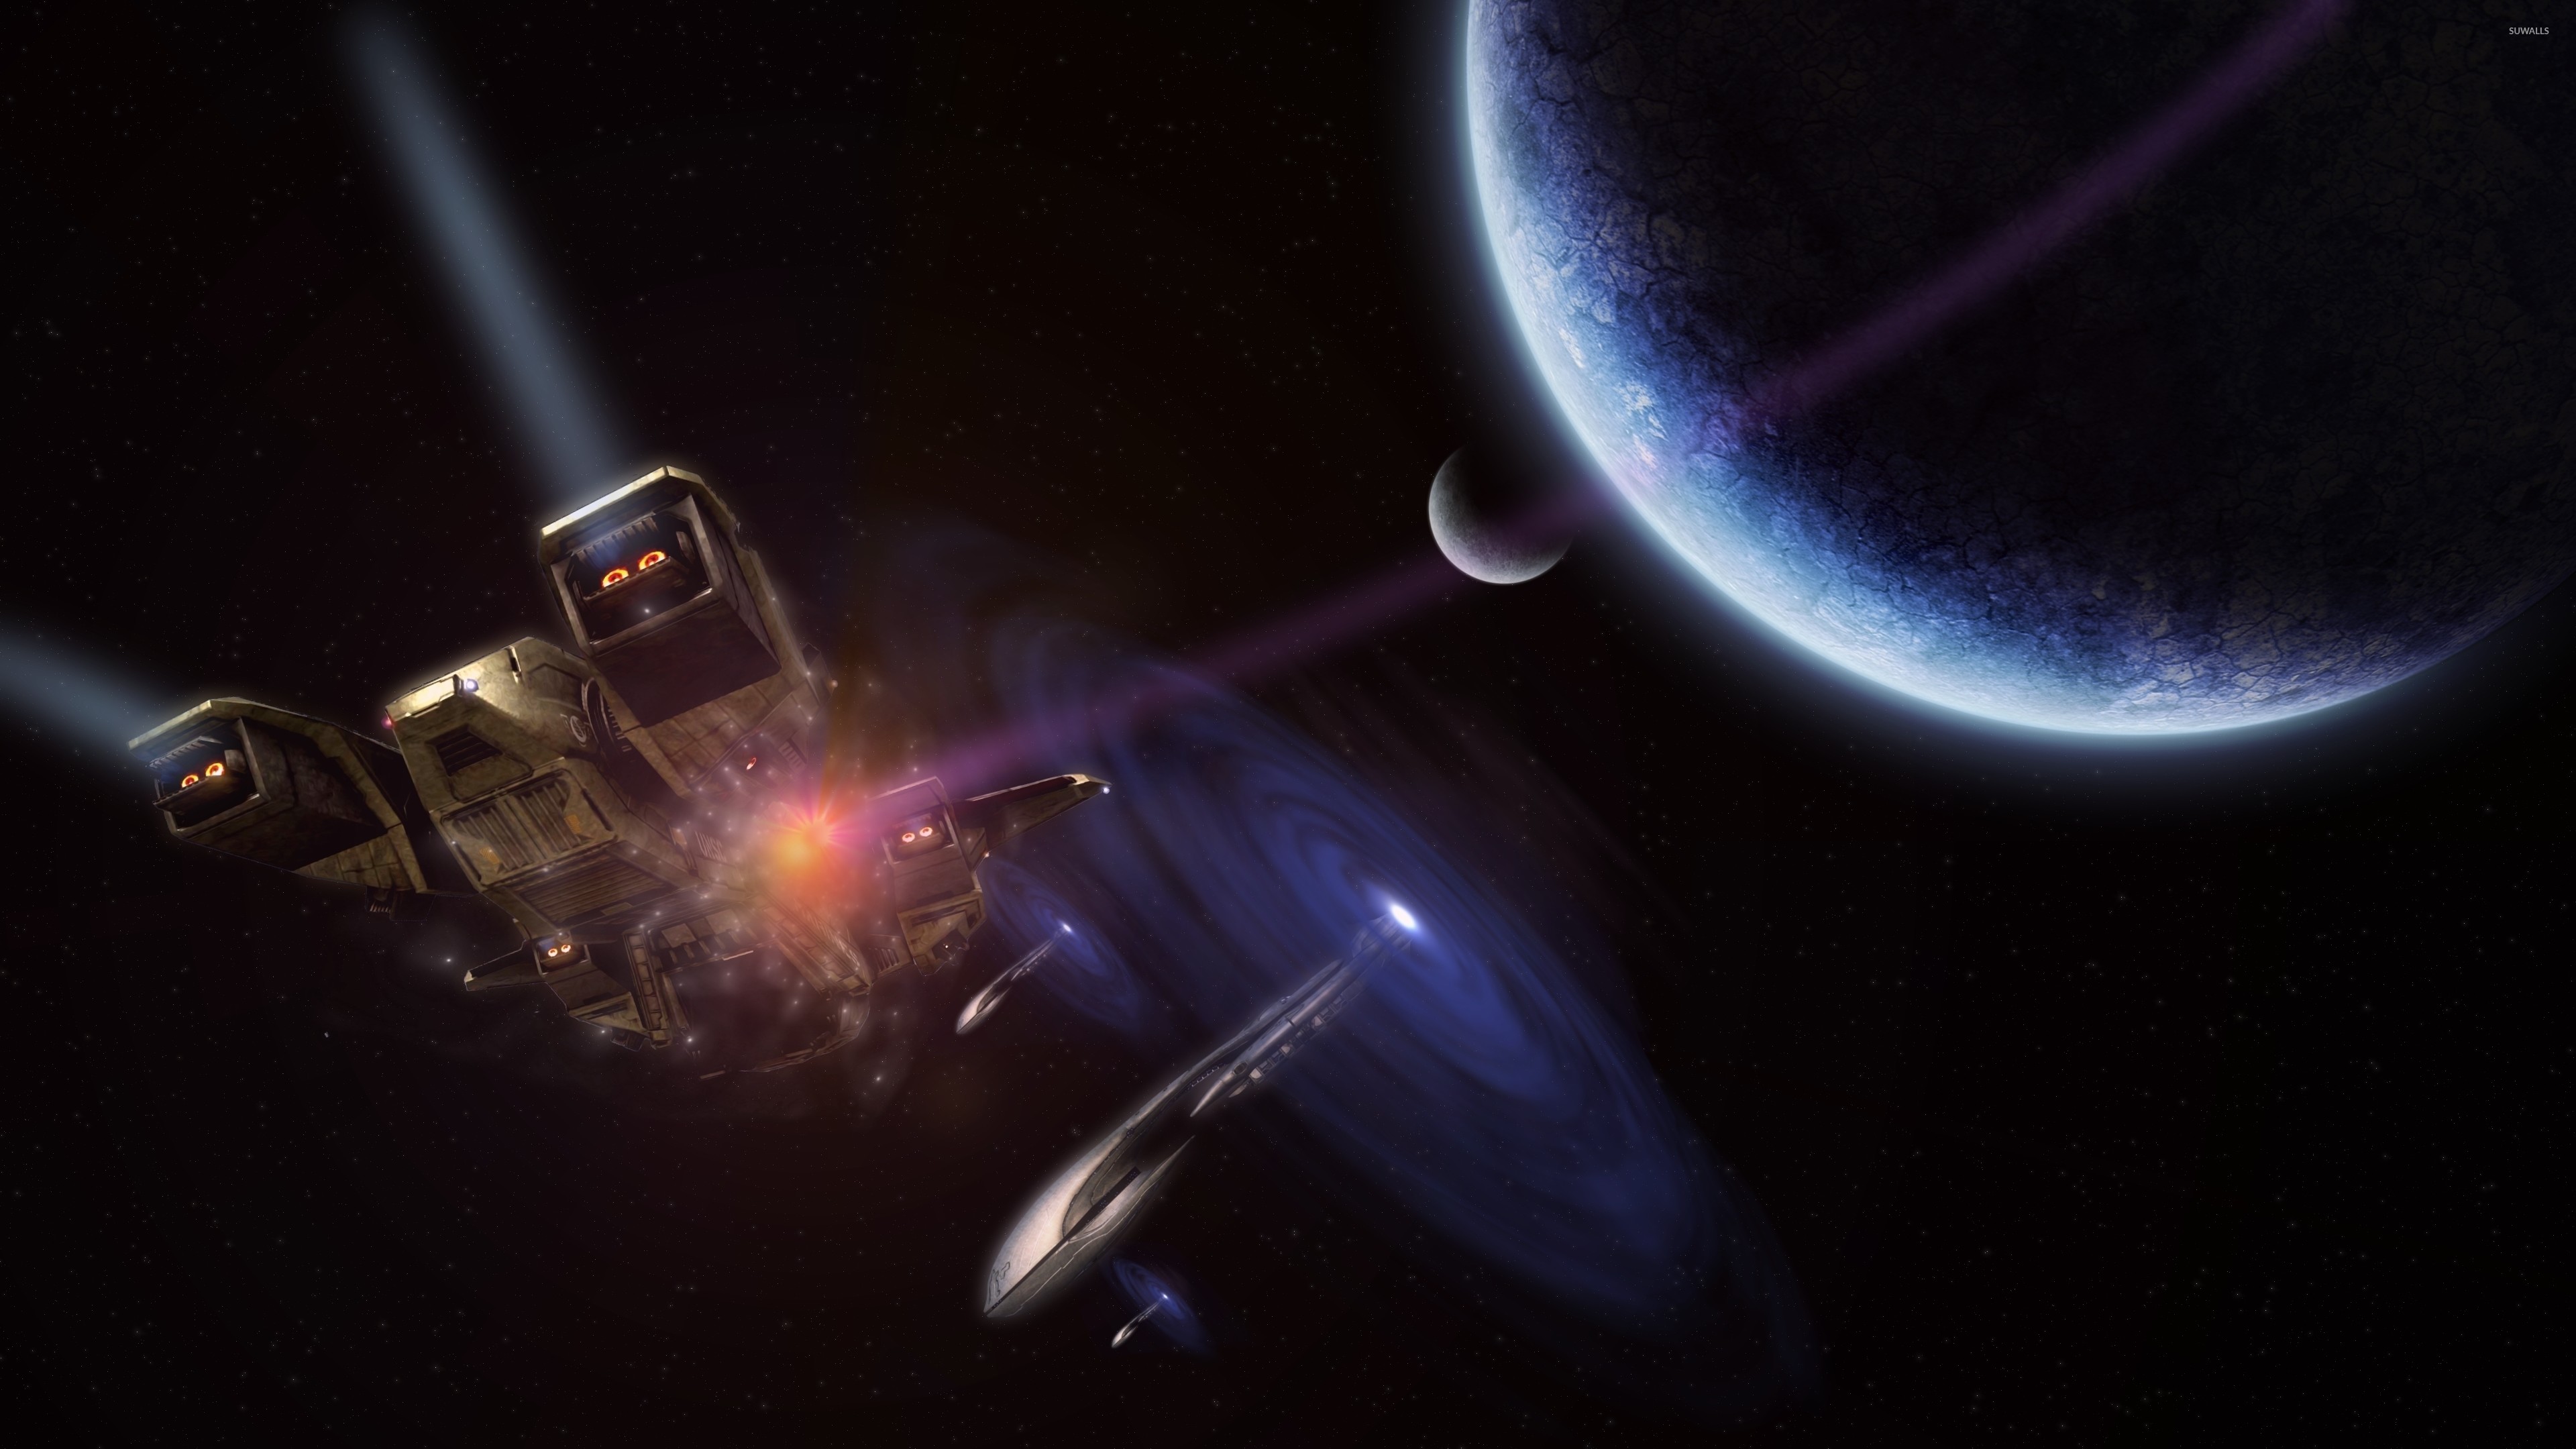 3840x2160 Spaceships exiting the portals by the planet wallpaper  jpg